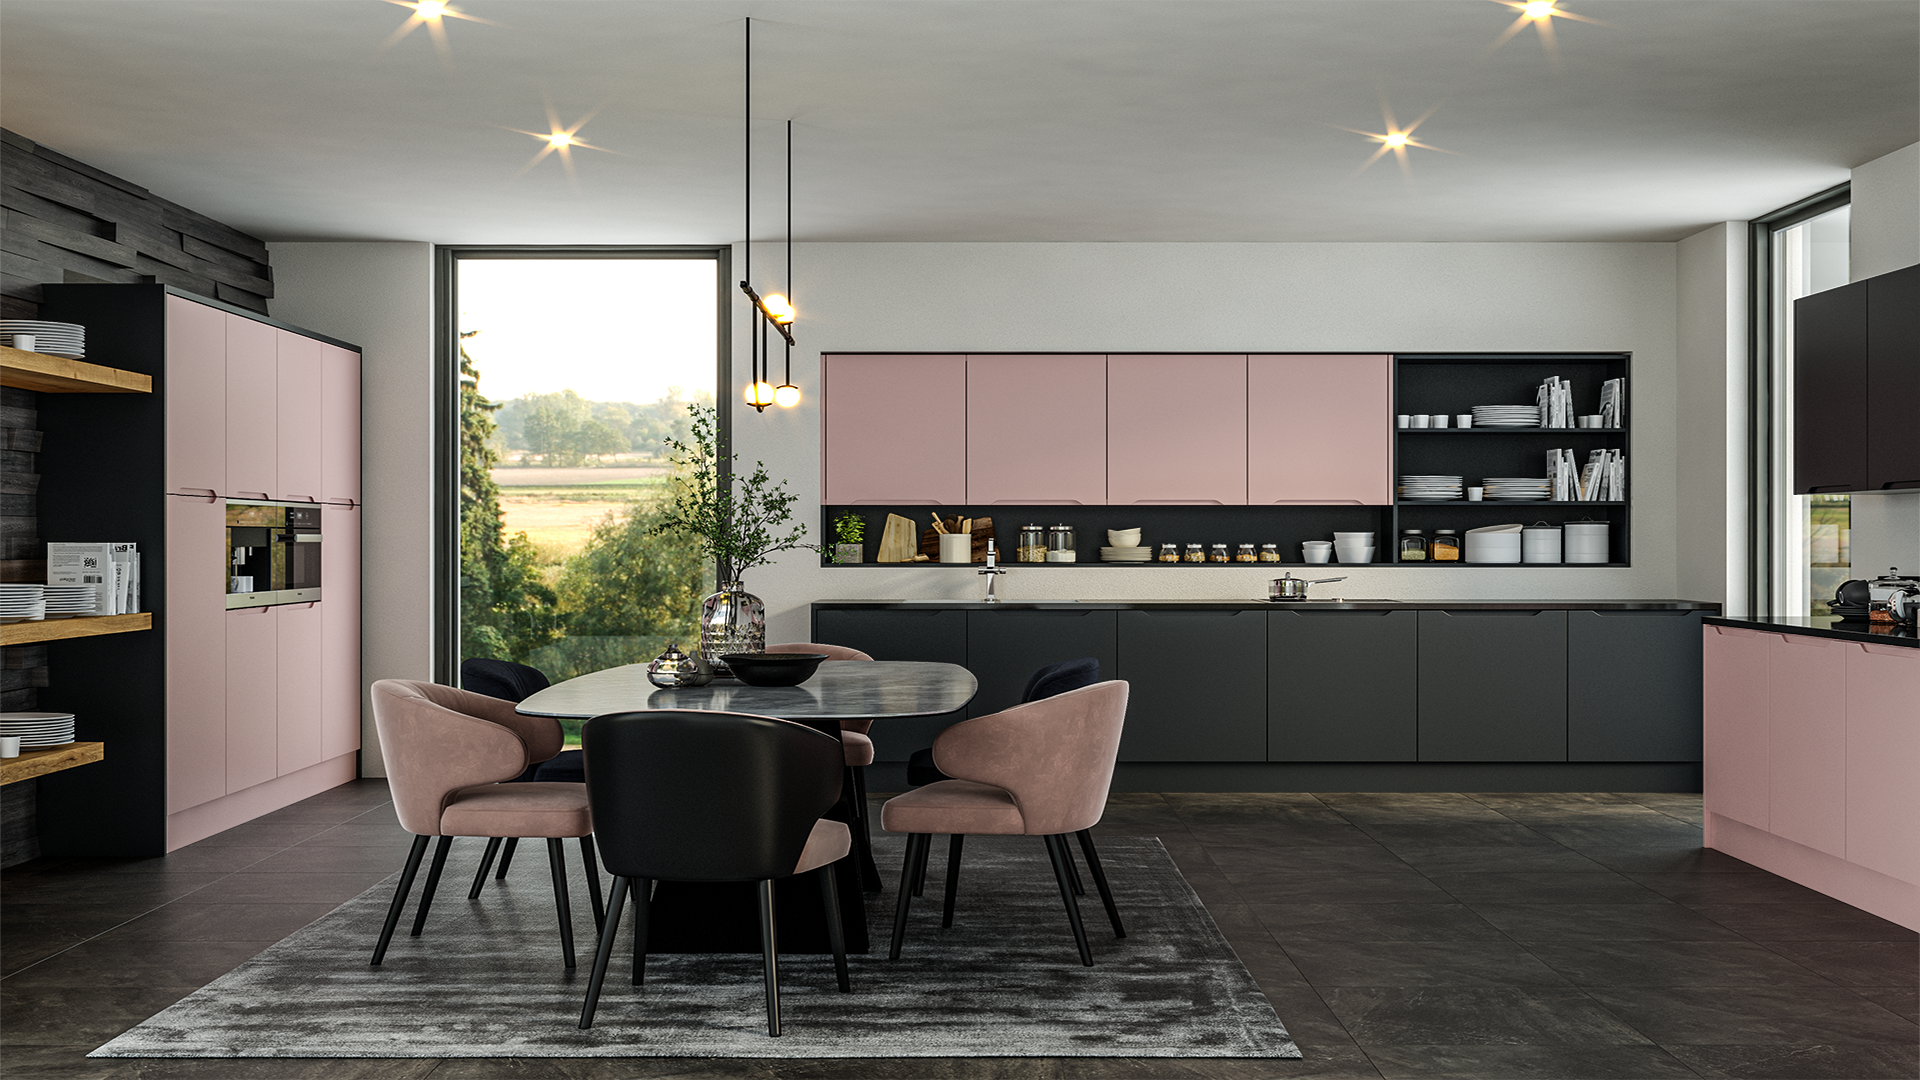  10. Have yourself a merry little Christmas with the Bella Matt Blush Pink kitchen as the heart of your home